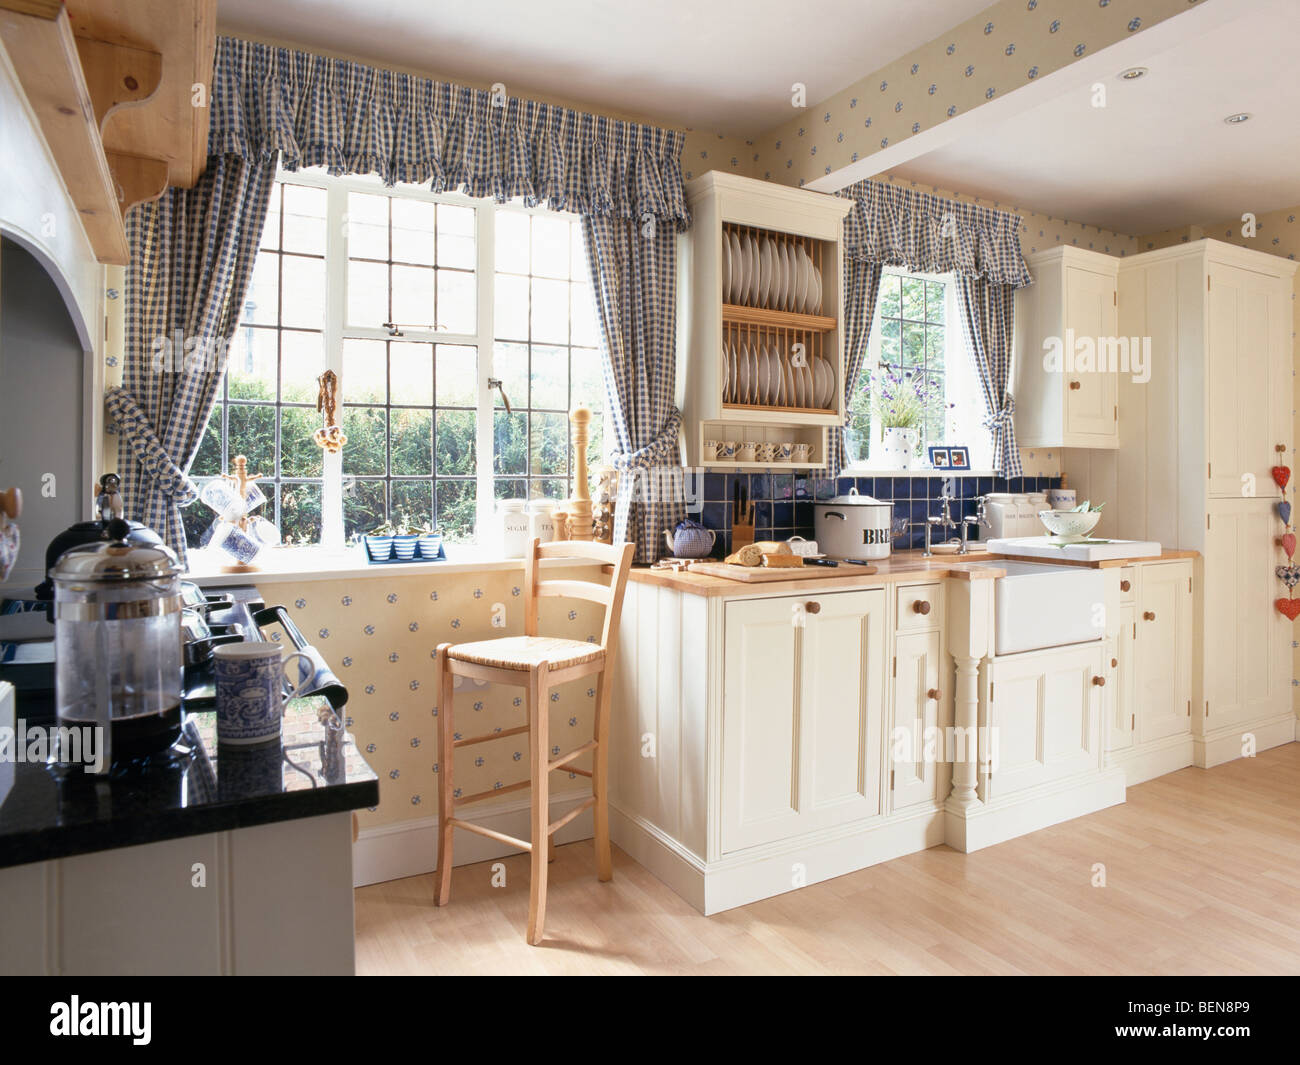 Blue Checked Curtains And Pelmets On Windows In Cream Country Kitchen Stock Photo Alamy